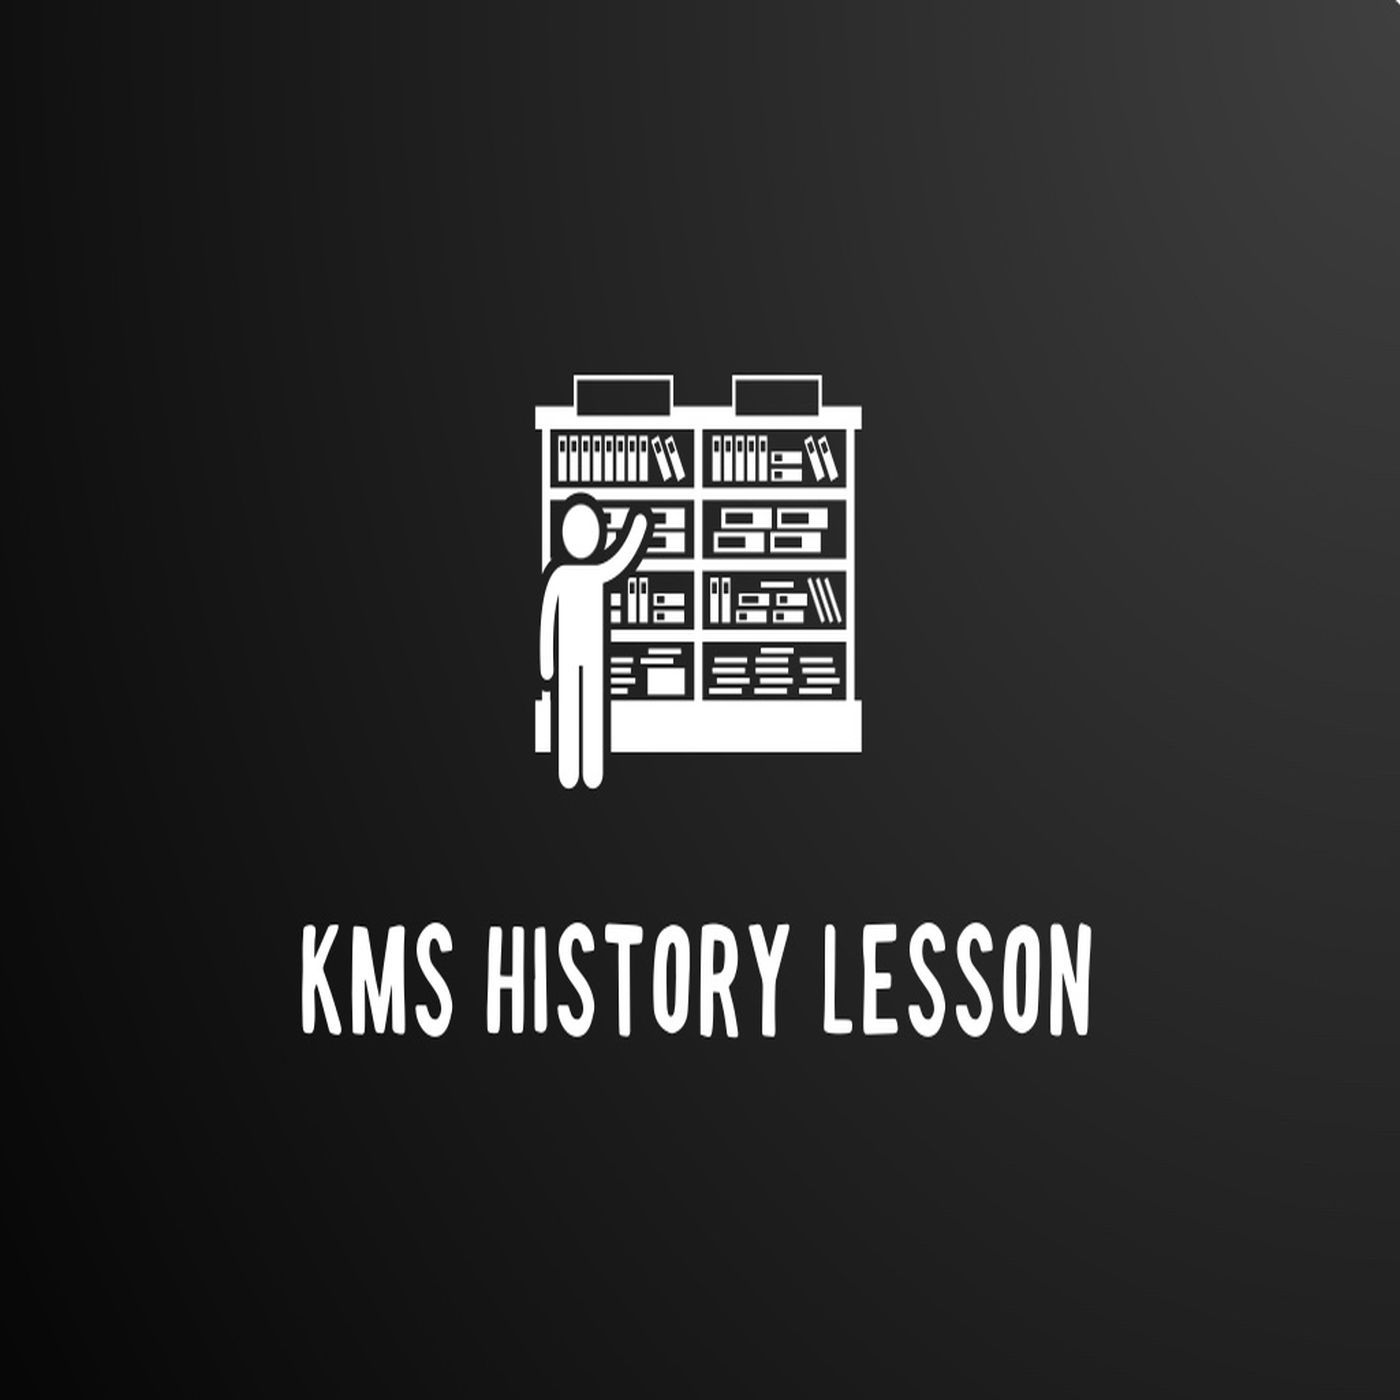 KMS History Lesson